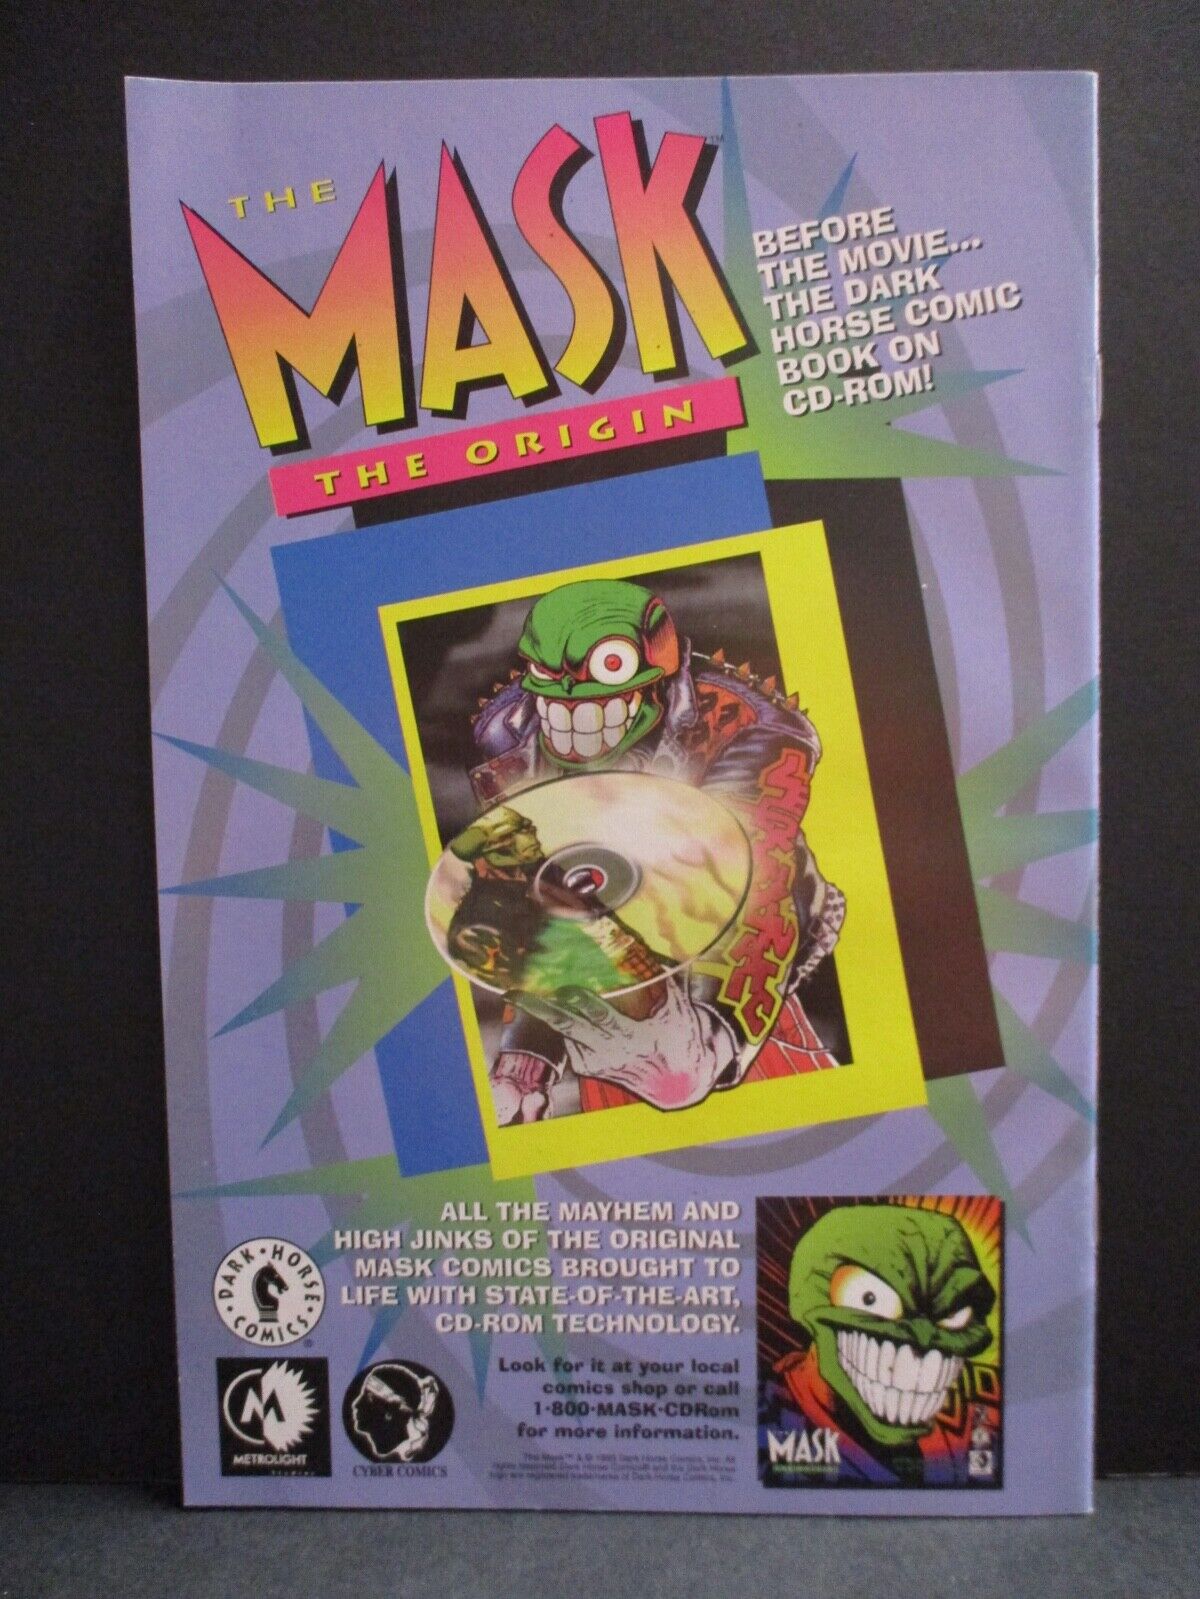 The Mask Strikes Back Dark Horse Comics 1 Issue of 5 EX Condition